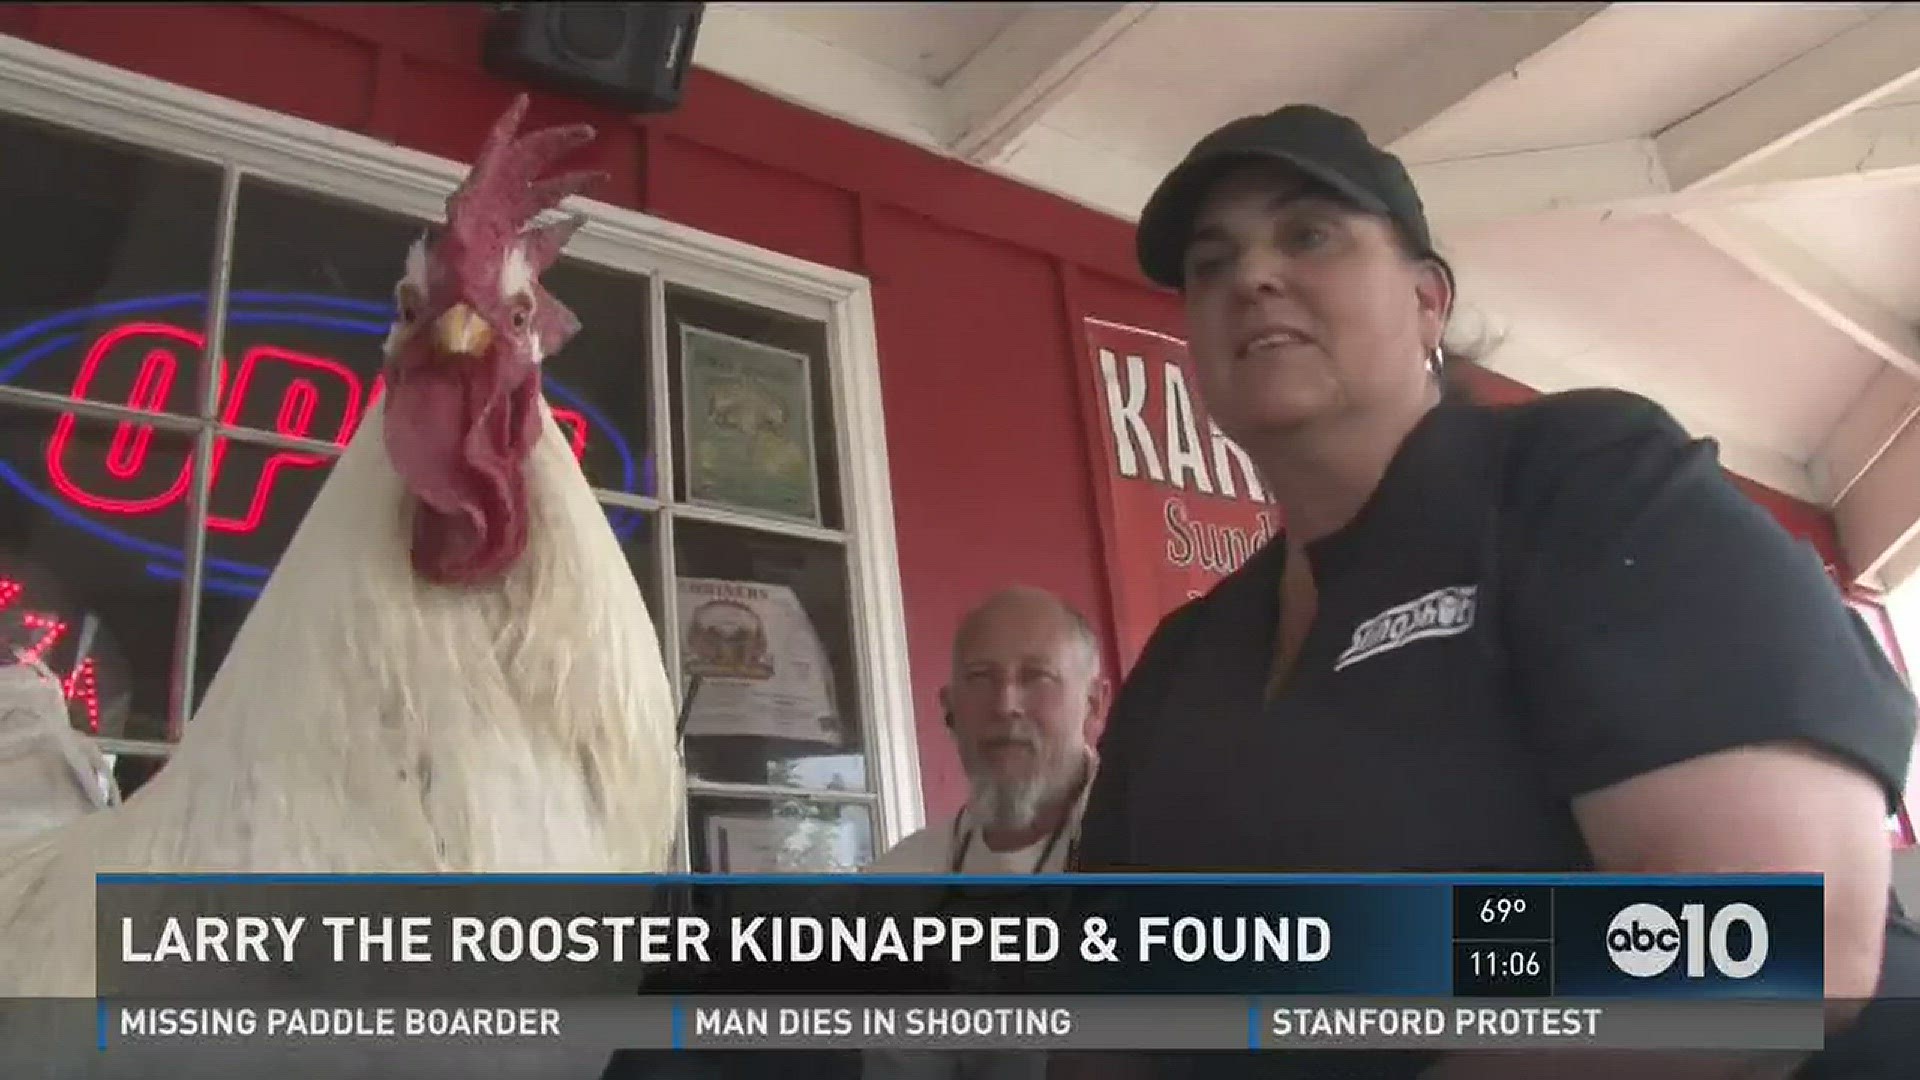 Just about everyone in Cameron Park was looking for Larry on Friday, when the popular rooster crossed the wrong street and didn't return home (June 11, 2016)